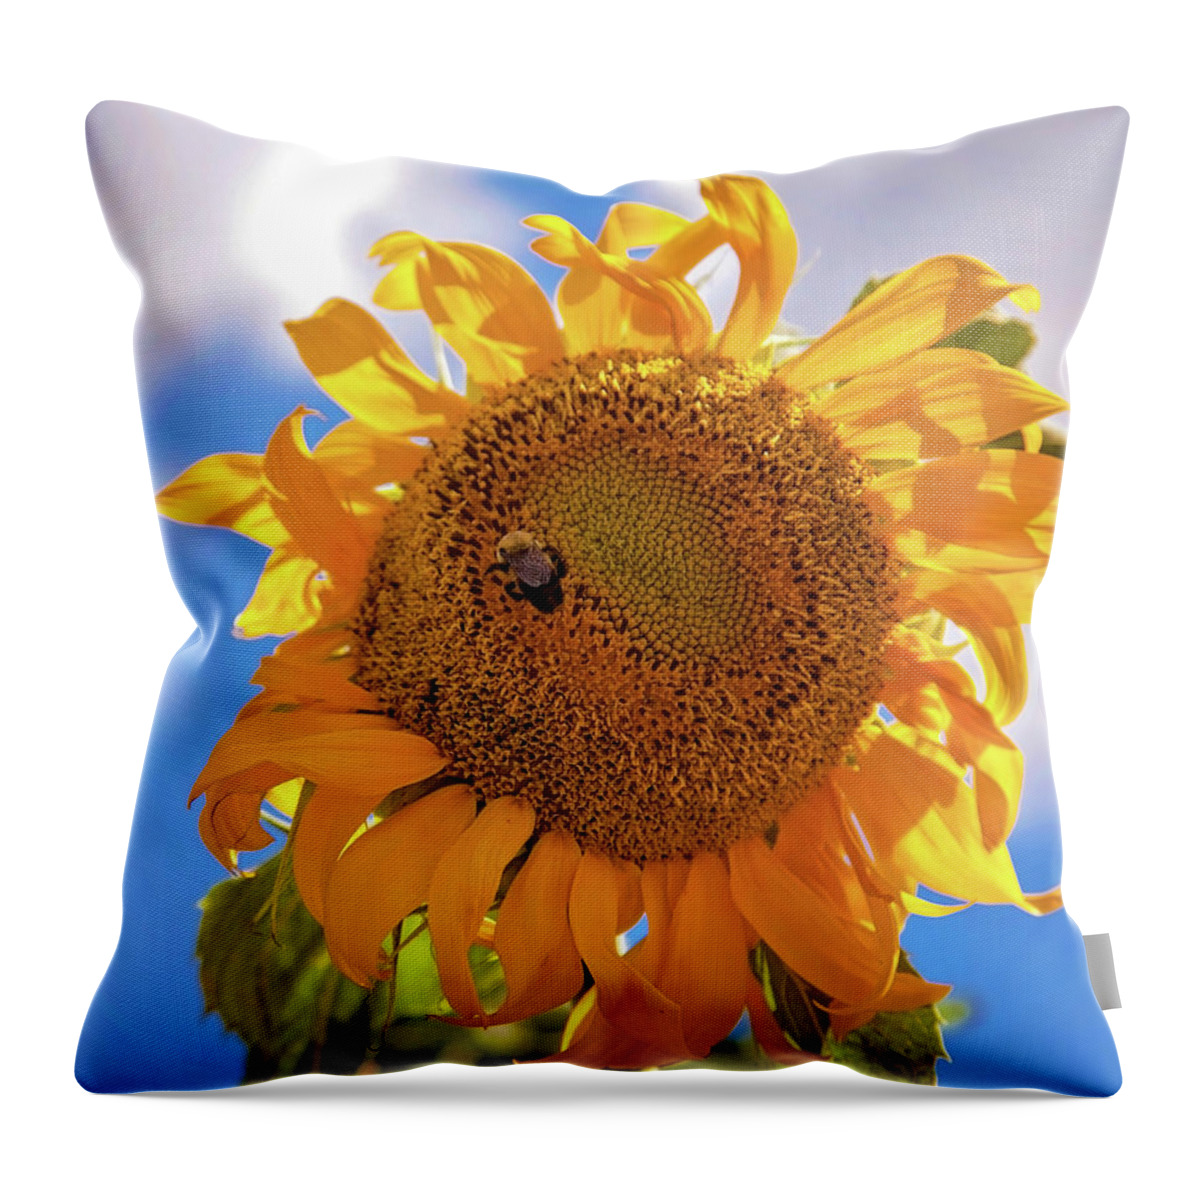 Sunflower Throw Pillow featuring the photograph Bee shaded by Sunflower by Toni Hopper